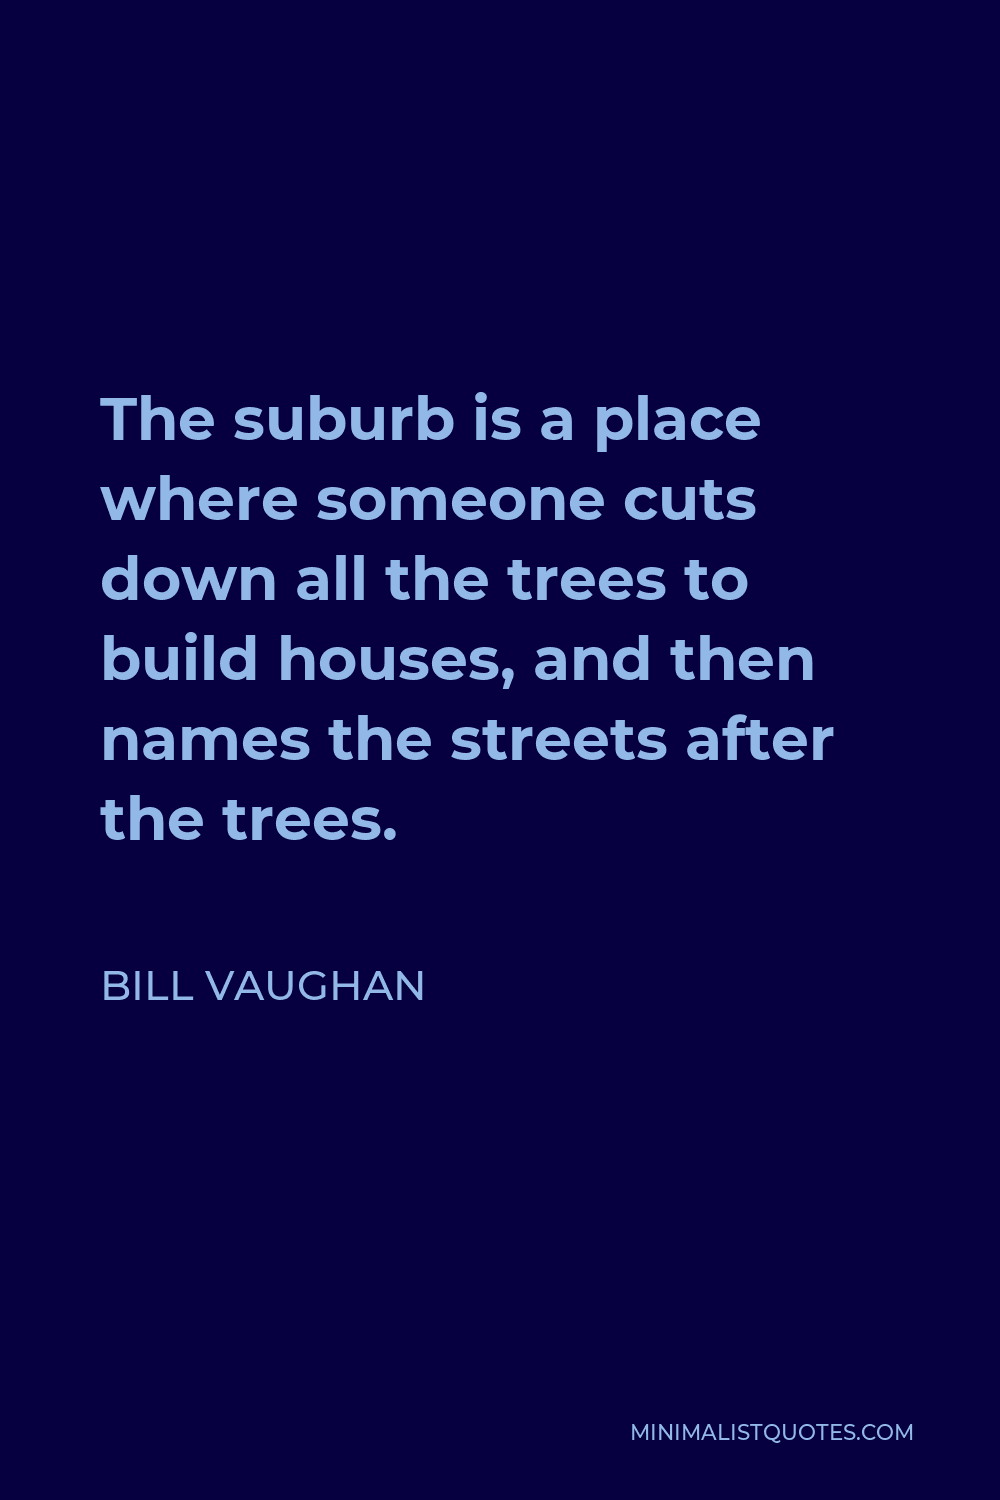 Bill Vaughan Quote - The suburb is a place where someone cuts down all the trees to build houses, and then names the streets after the trees.